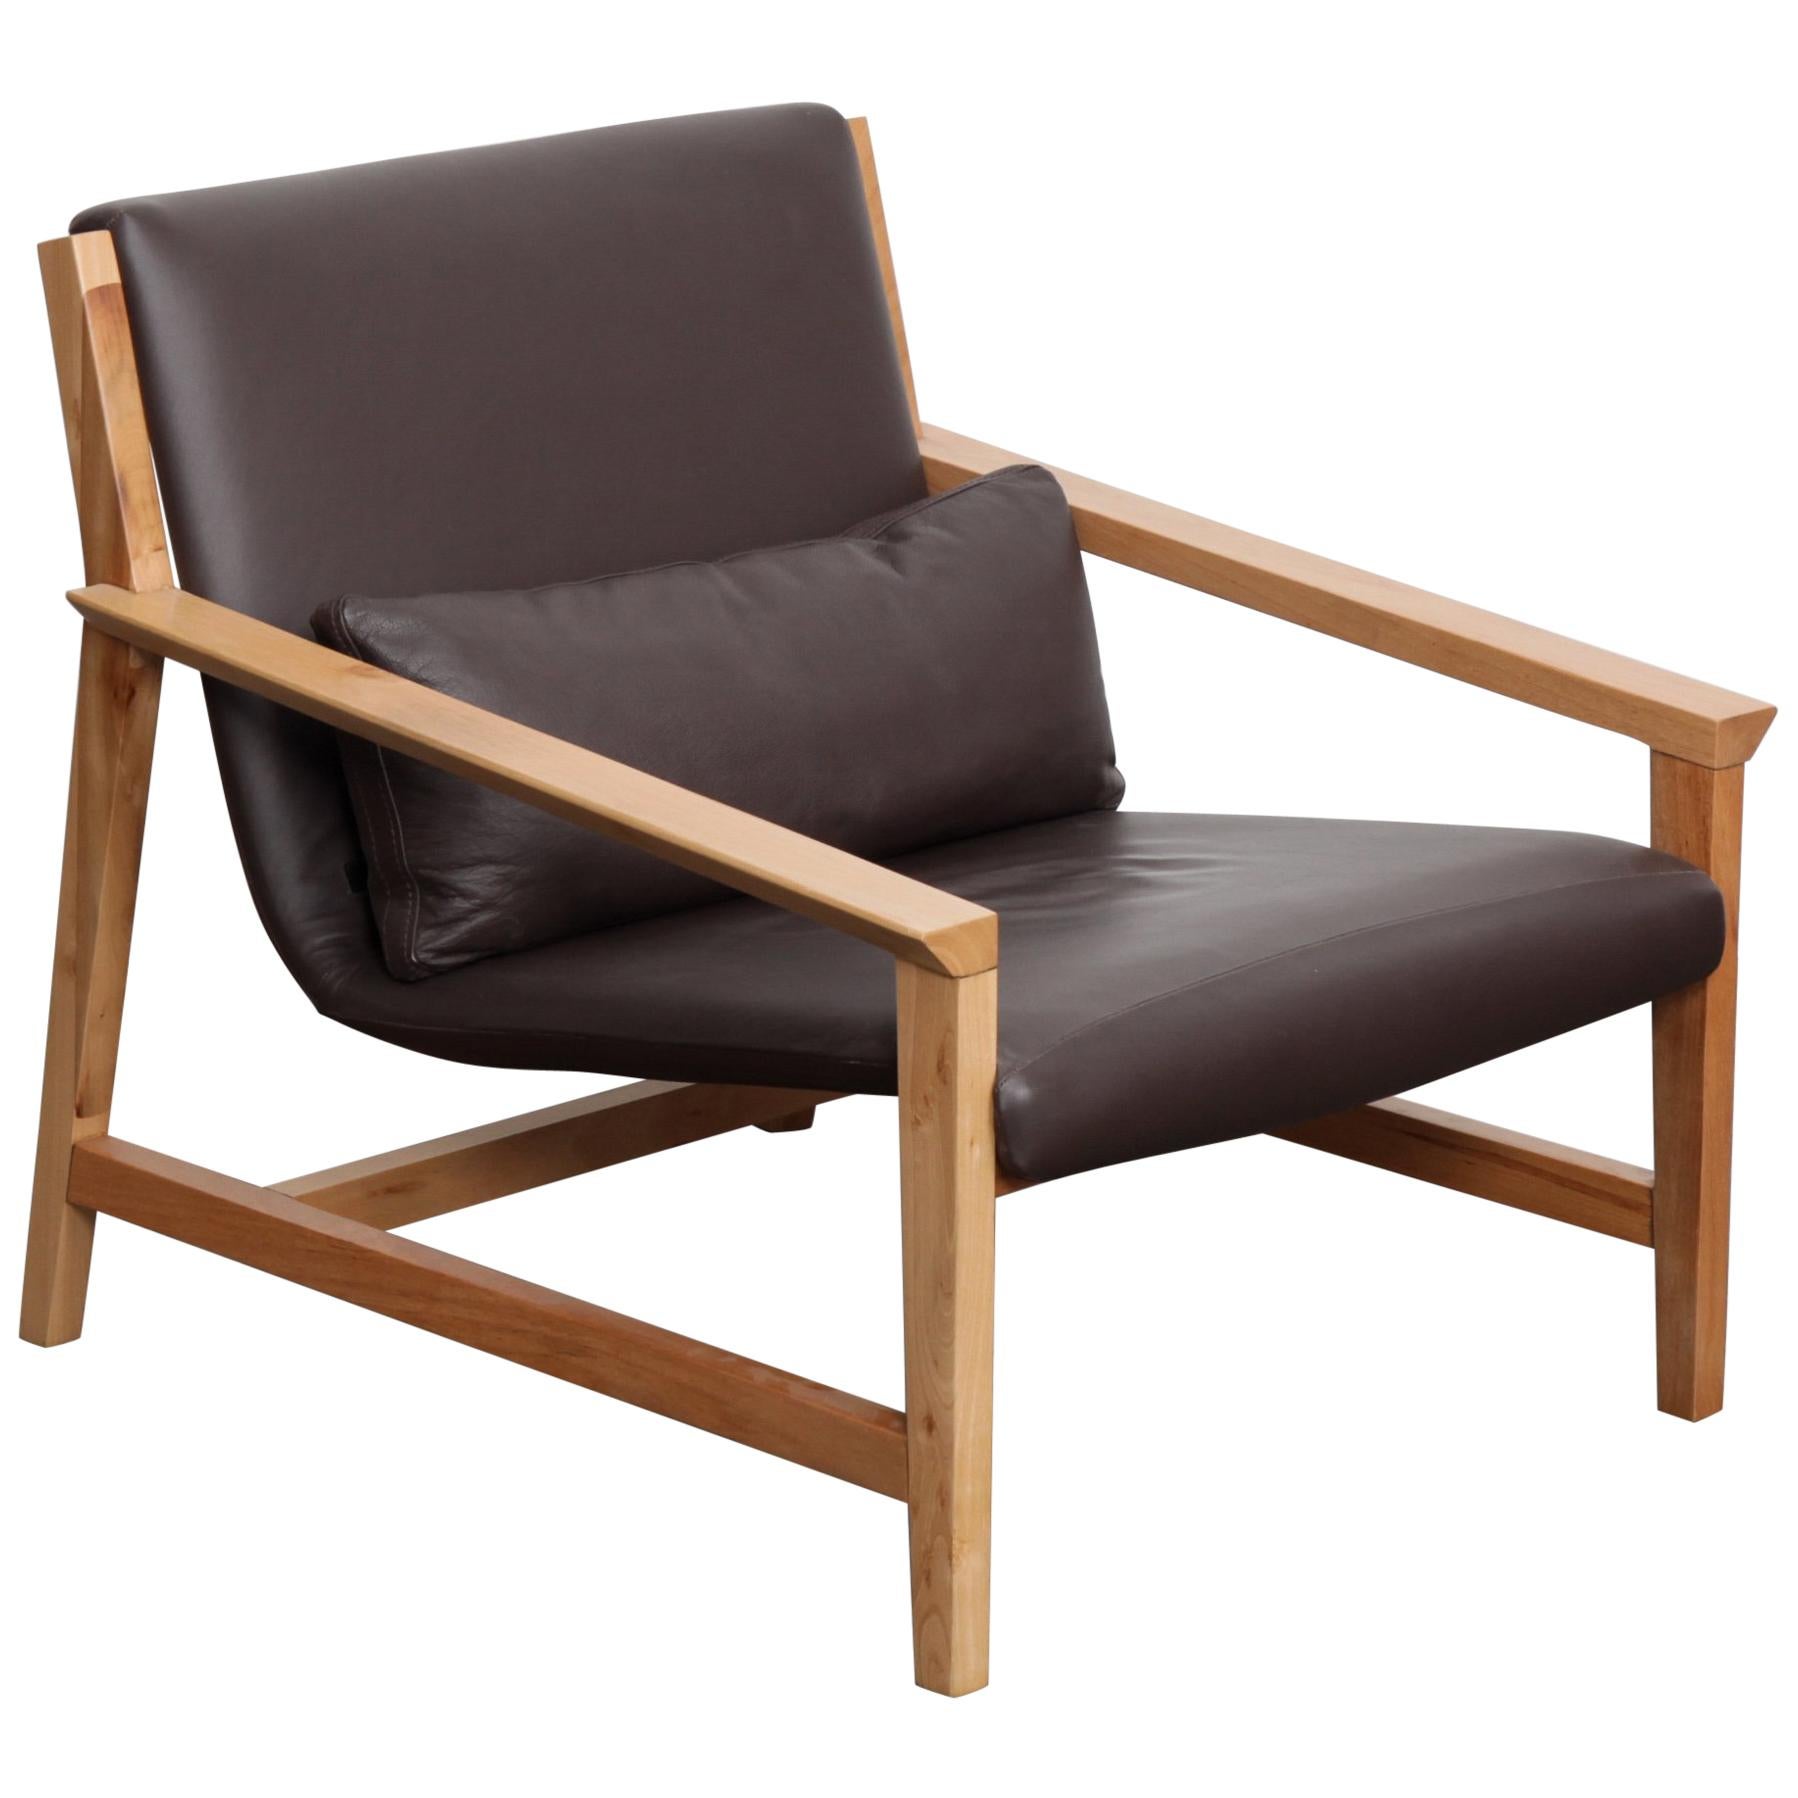 Angular Solid Maple Frame Lounge Chair Clad in Chocolate Brown Leather For Sale